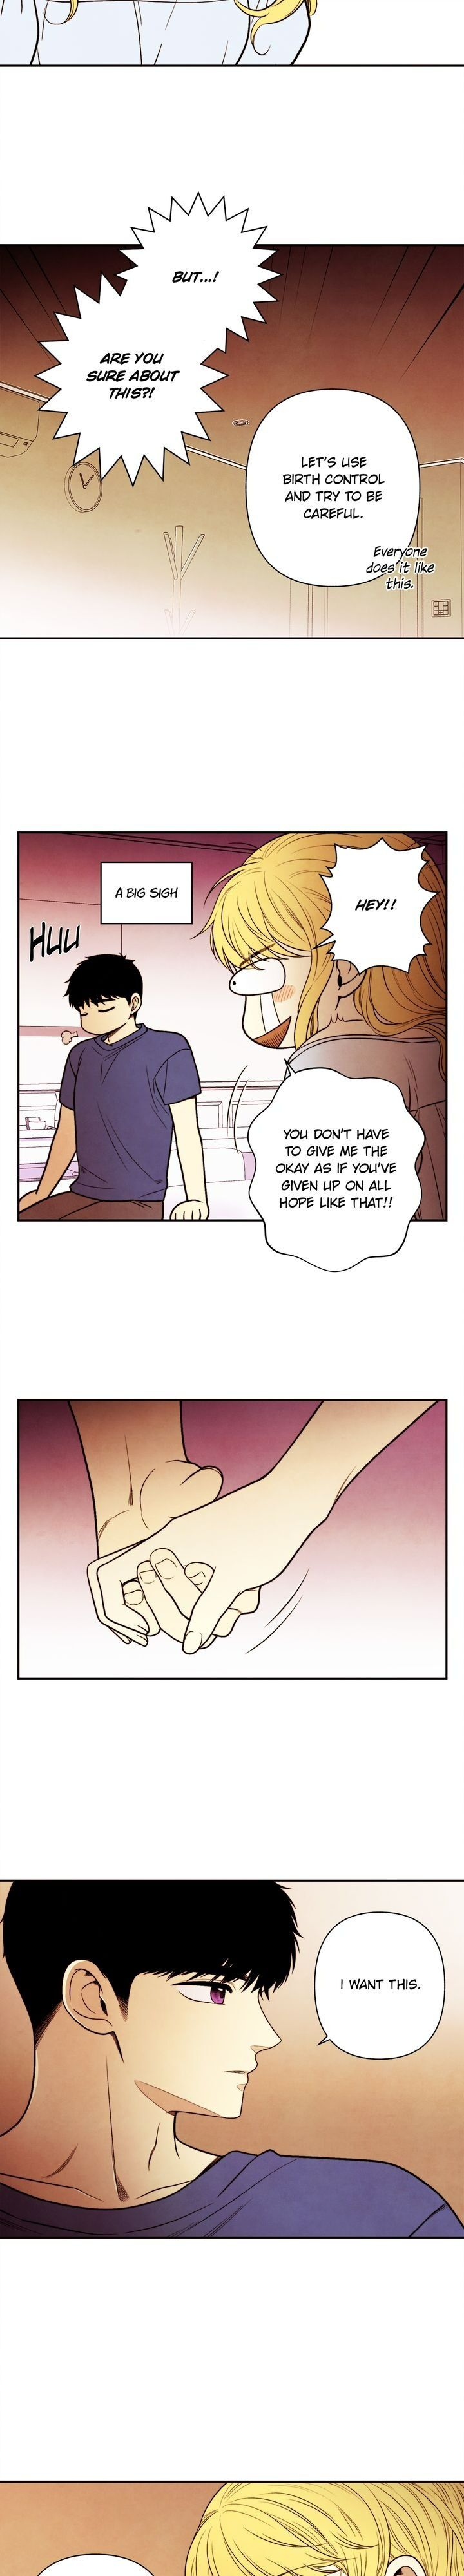 Just Give it to Me - Chapter 151 Page 6